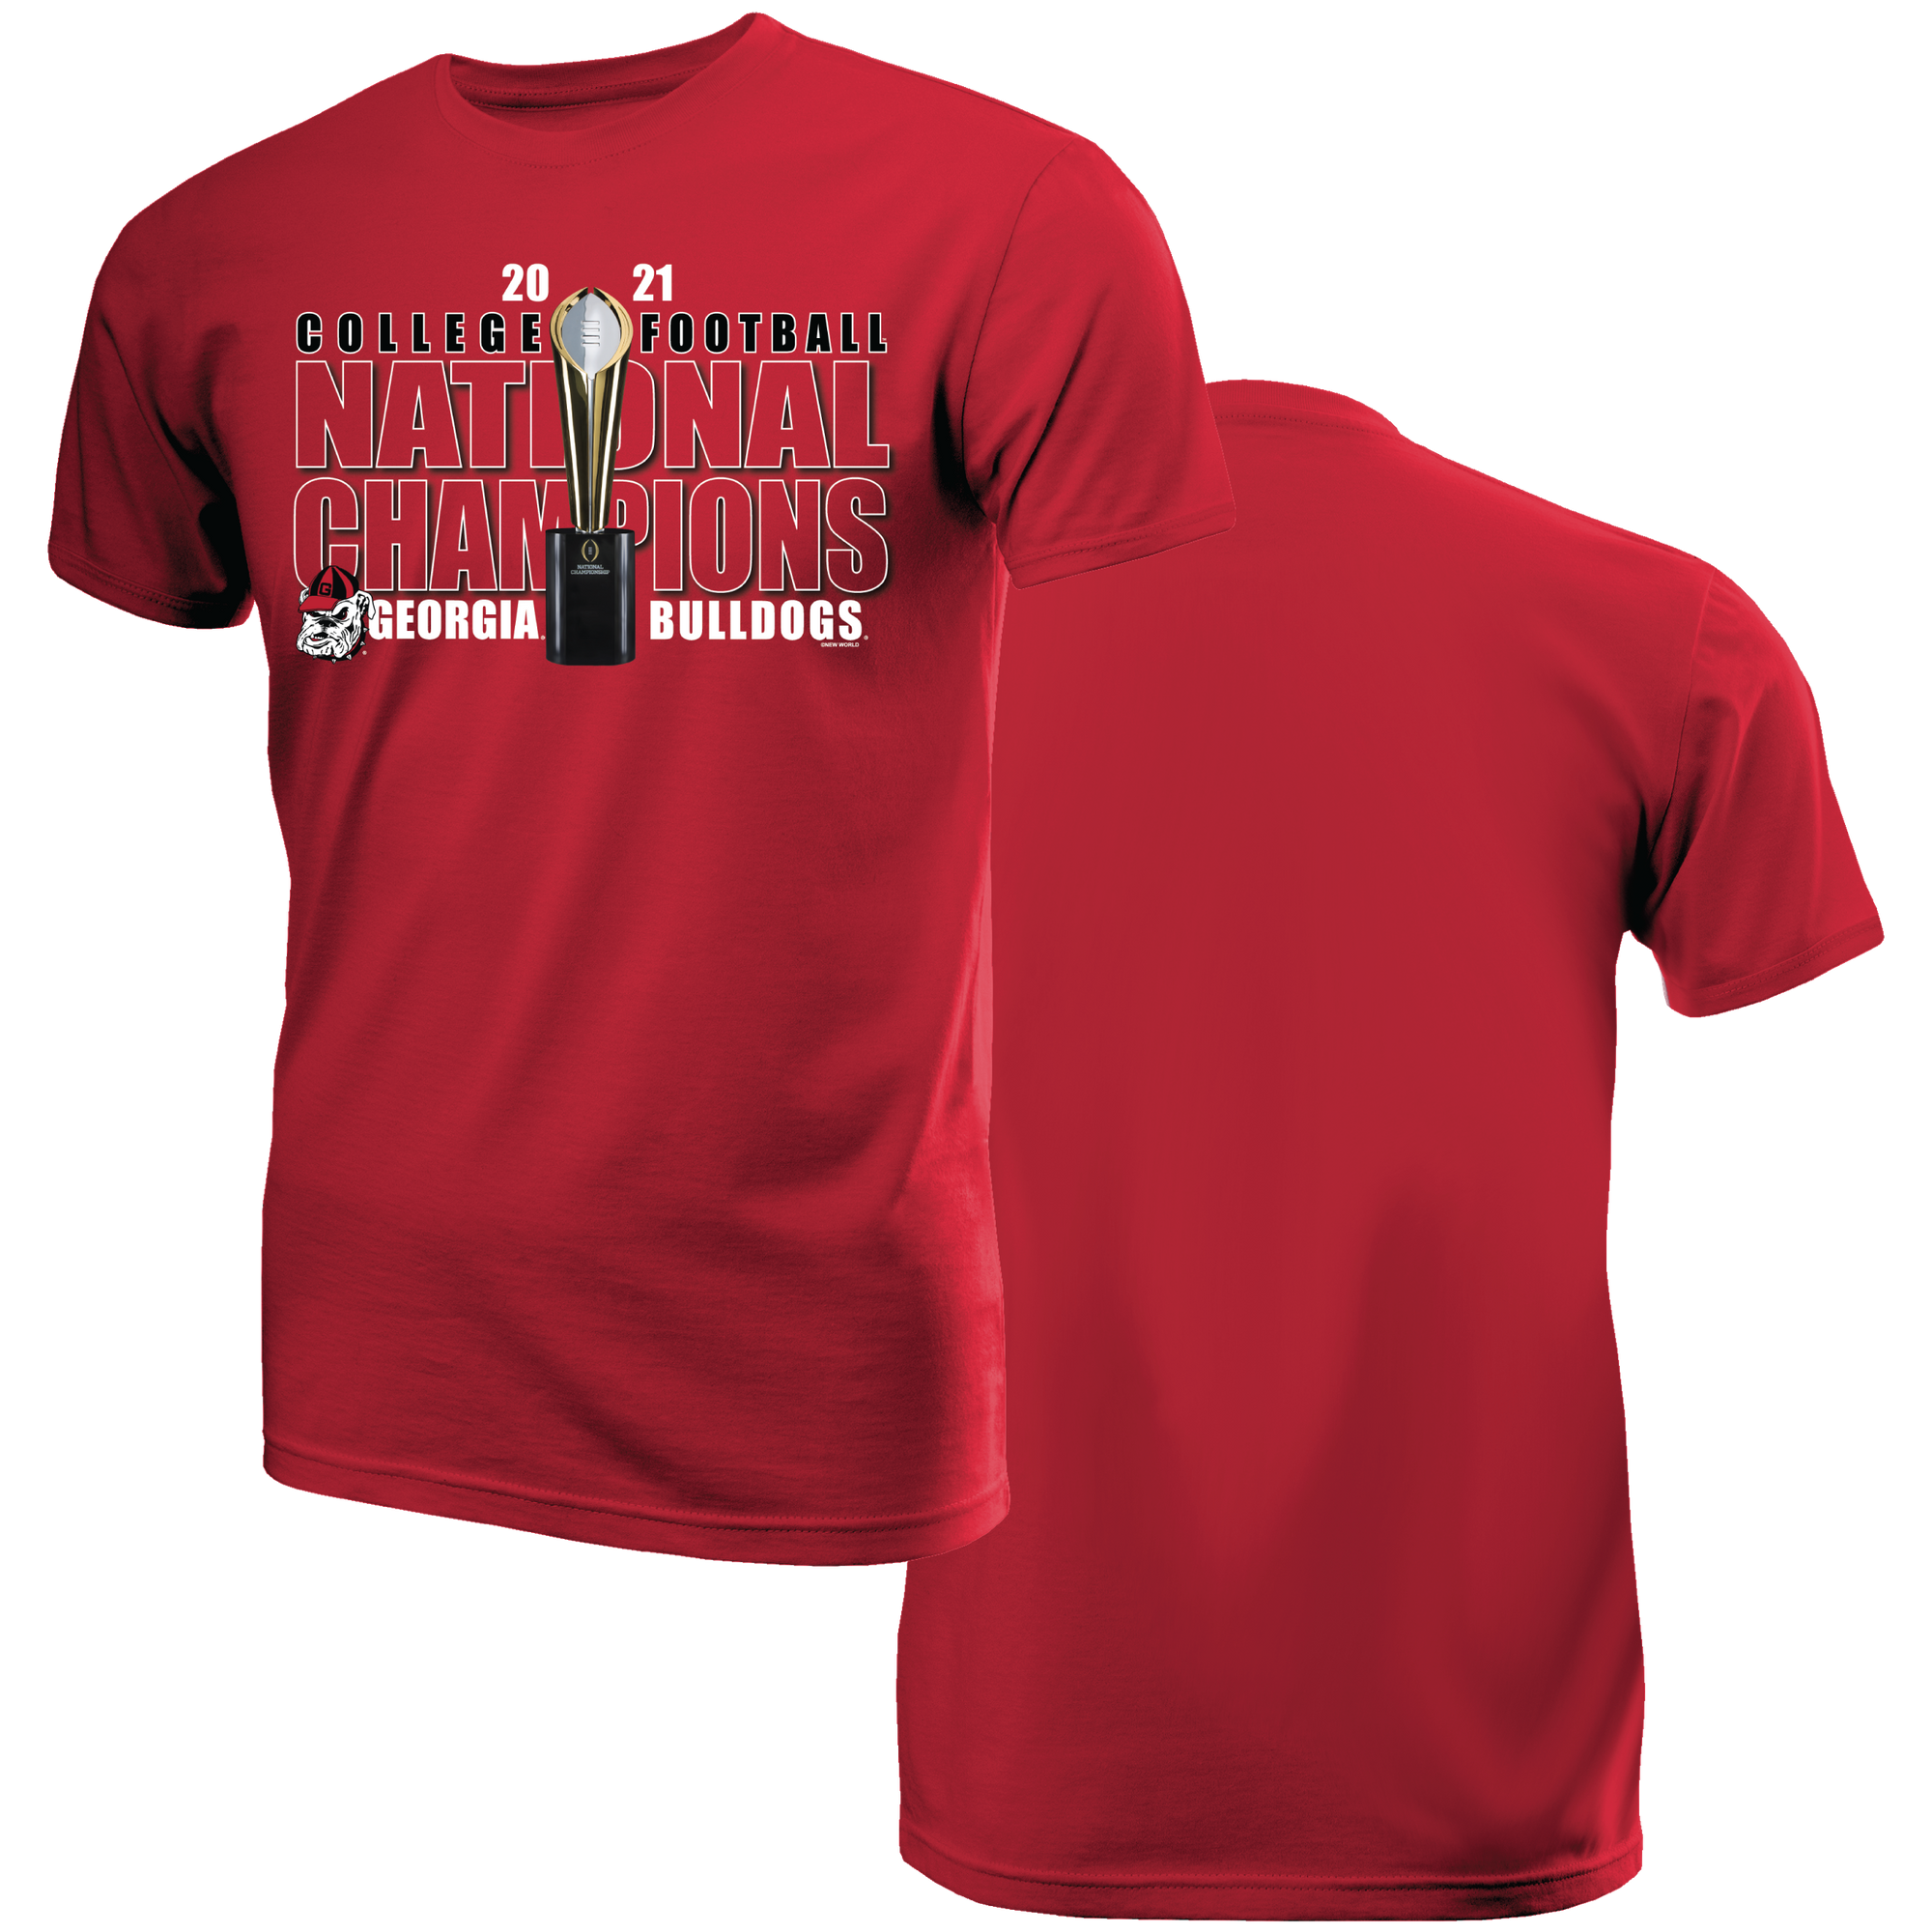 (Red) UGA "Official National Championship" Tee